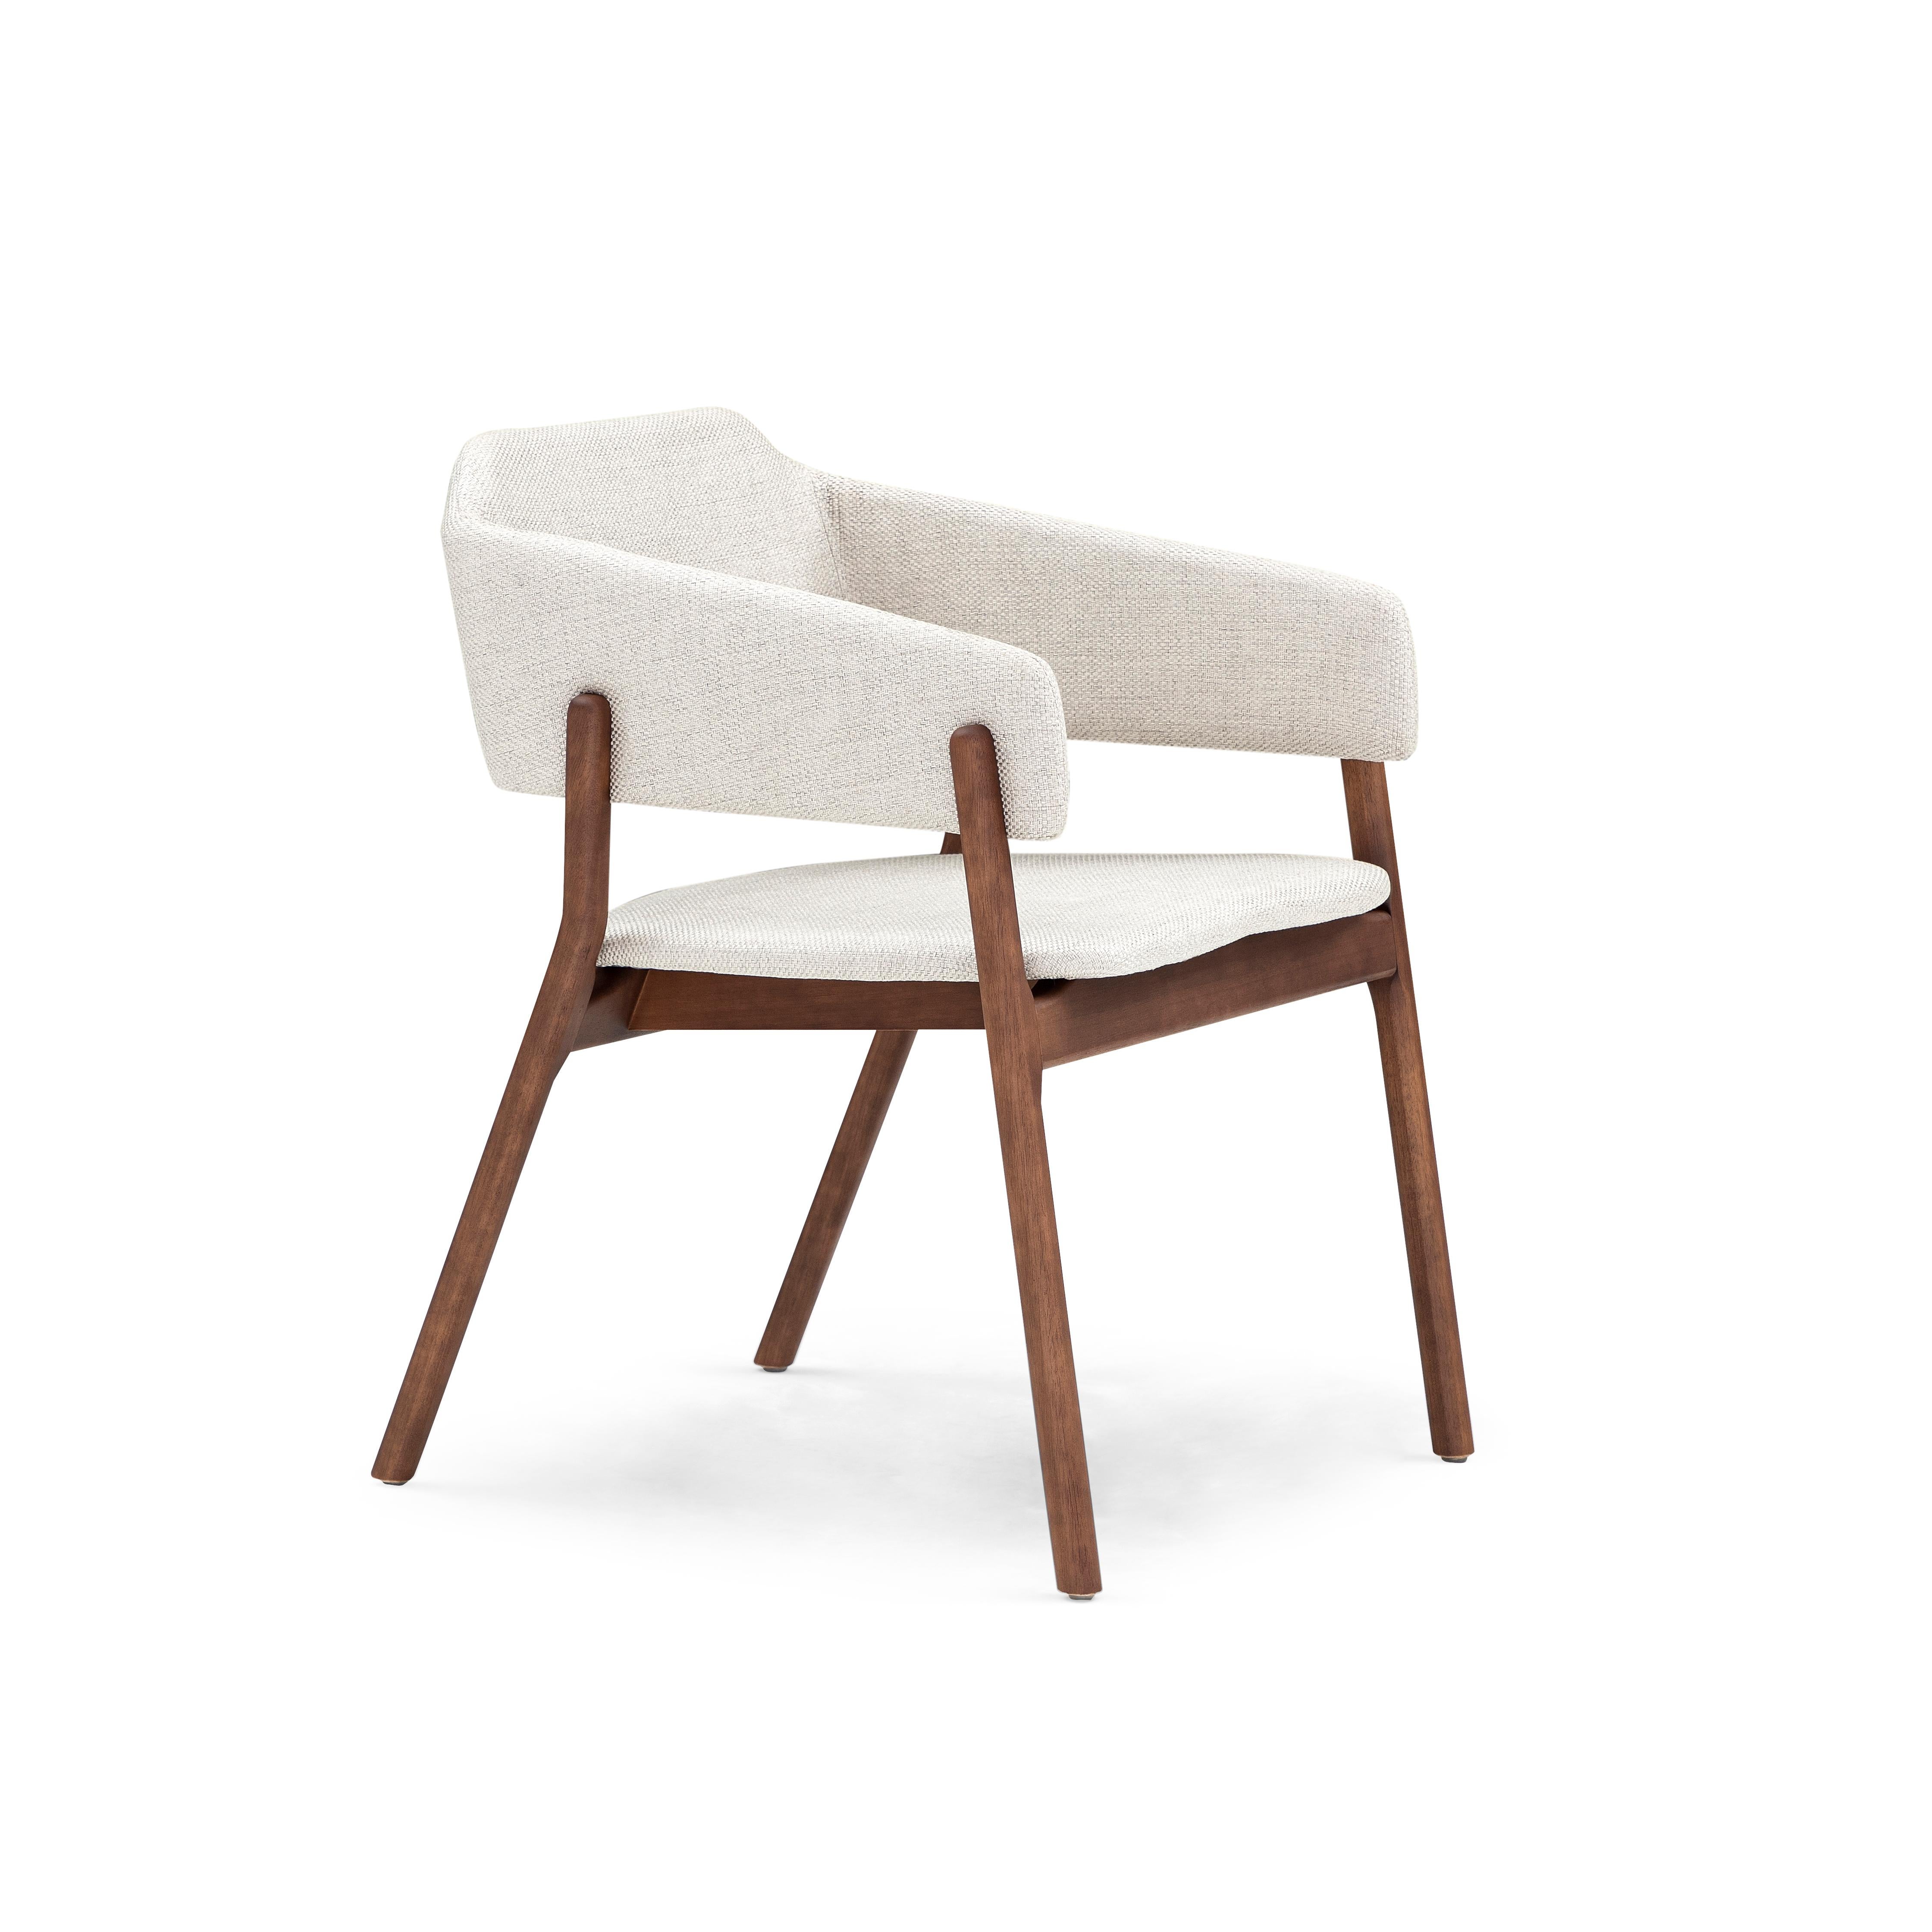 Stuzi Chair in Walnut Wood Finish with an Off-White Fabric In New Condition For Sale In Miami, FL